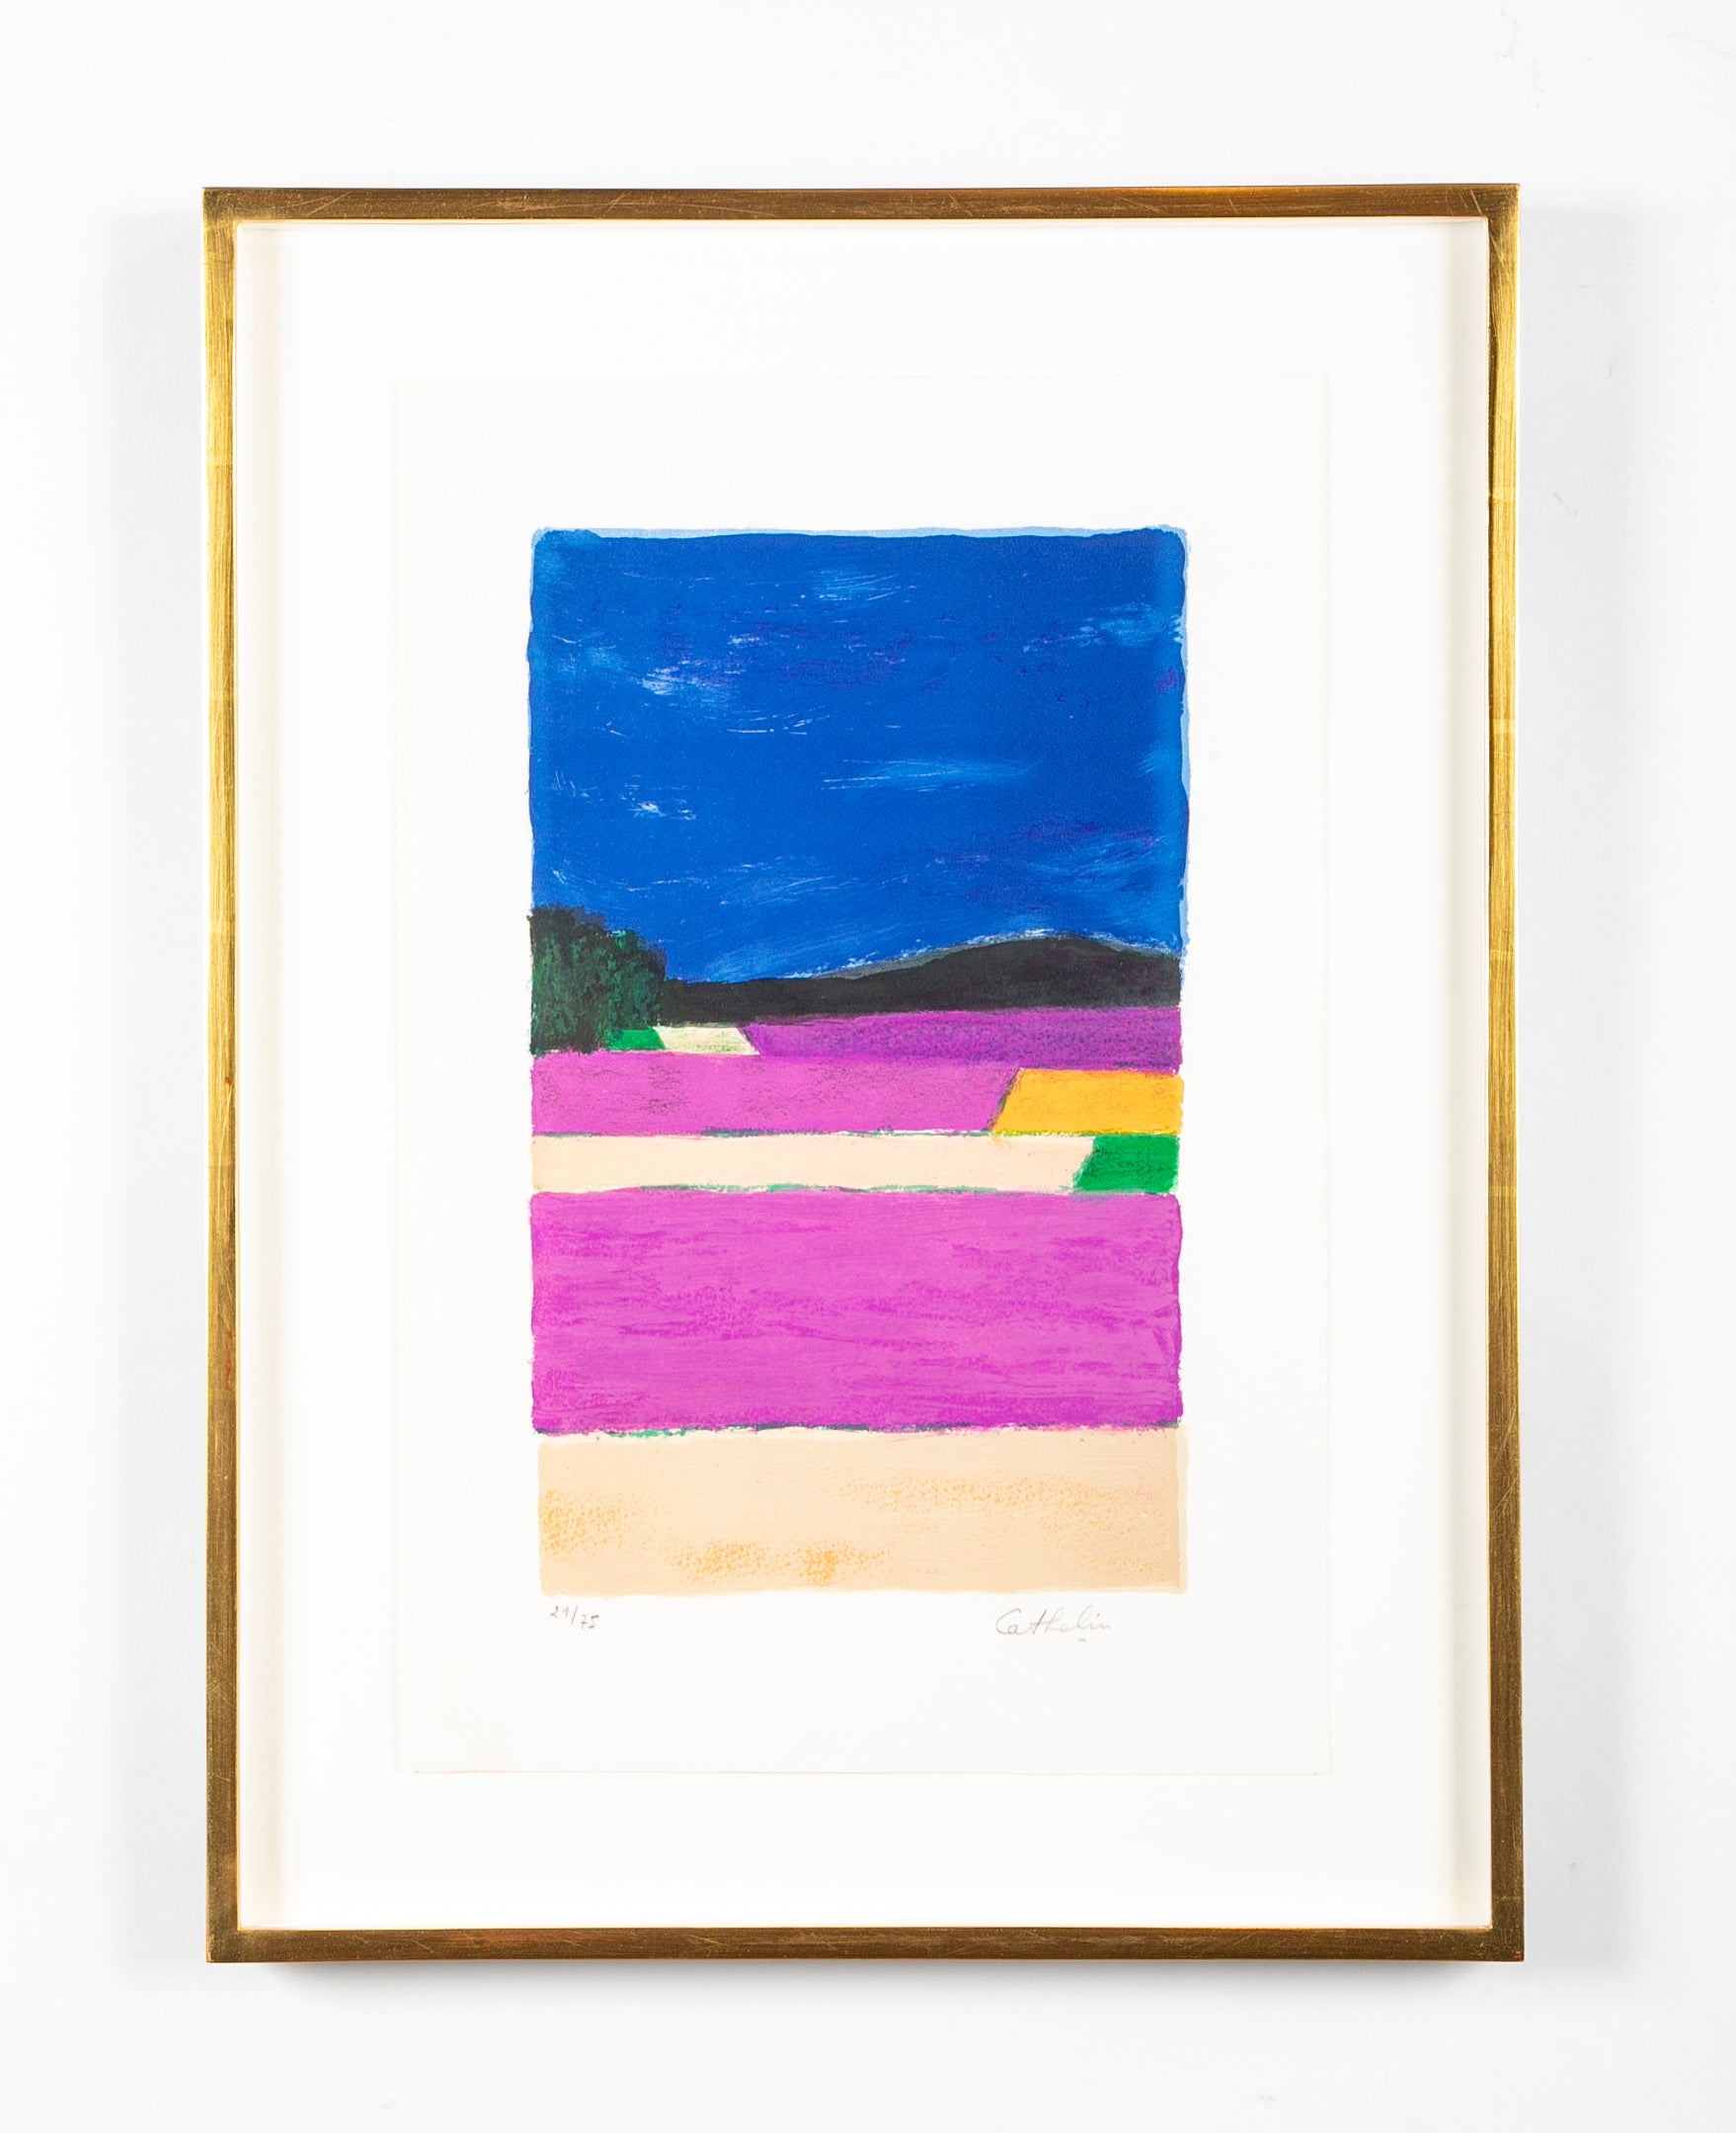 "Lavender Field" Lithograph in Colors by Bernard Cathelin